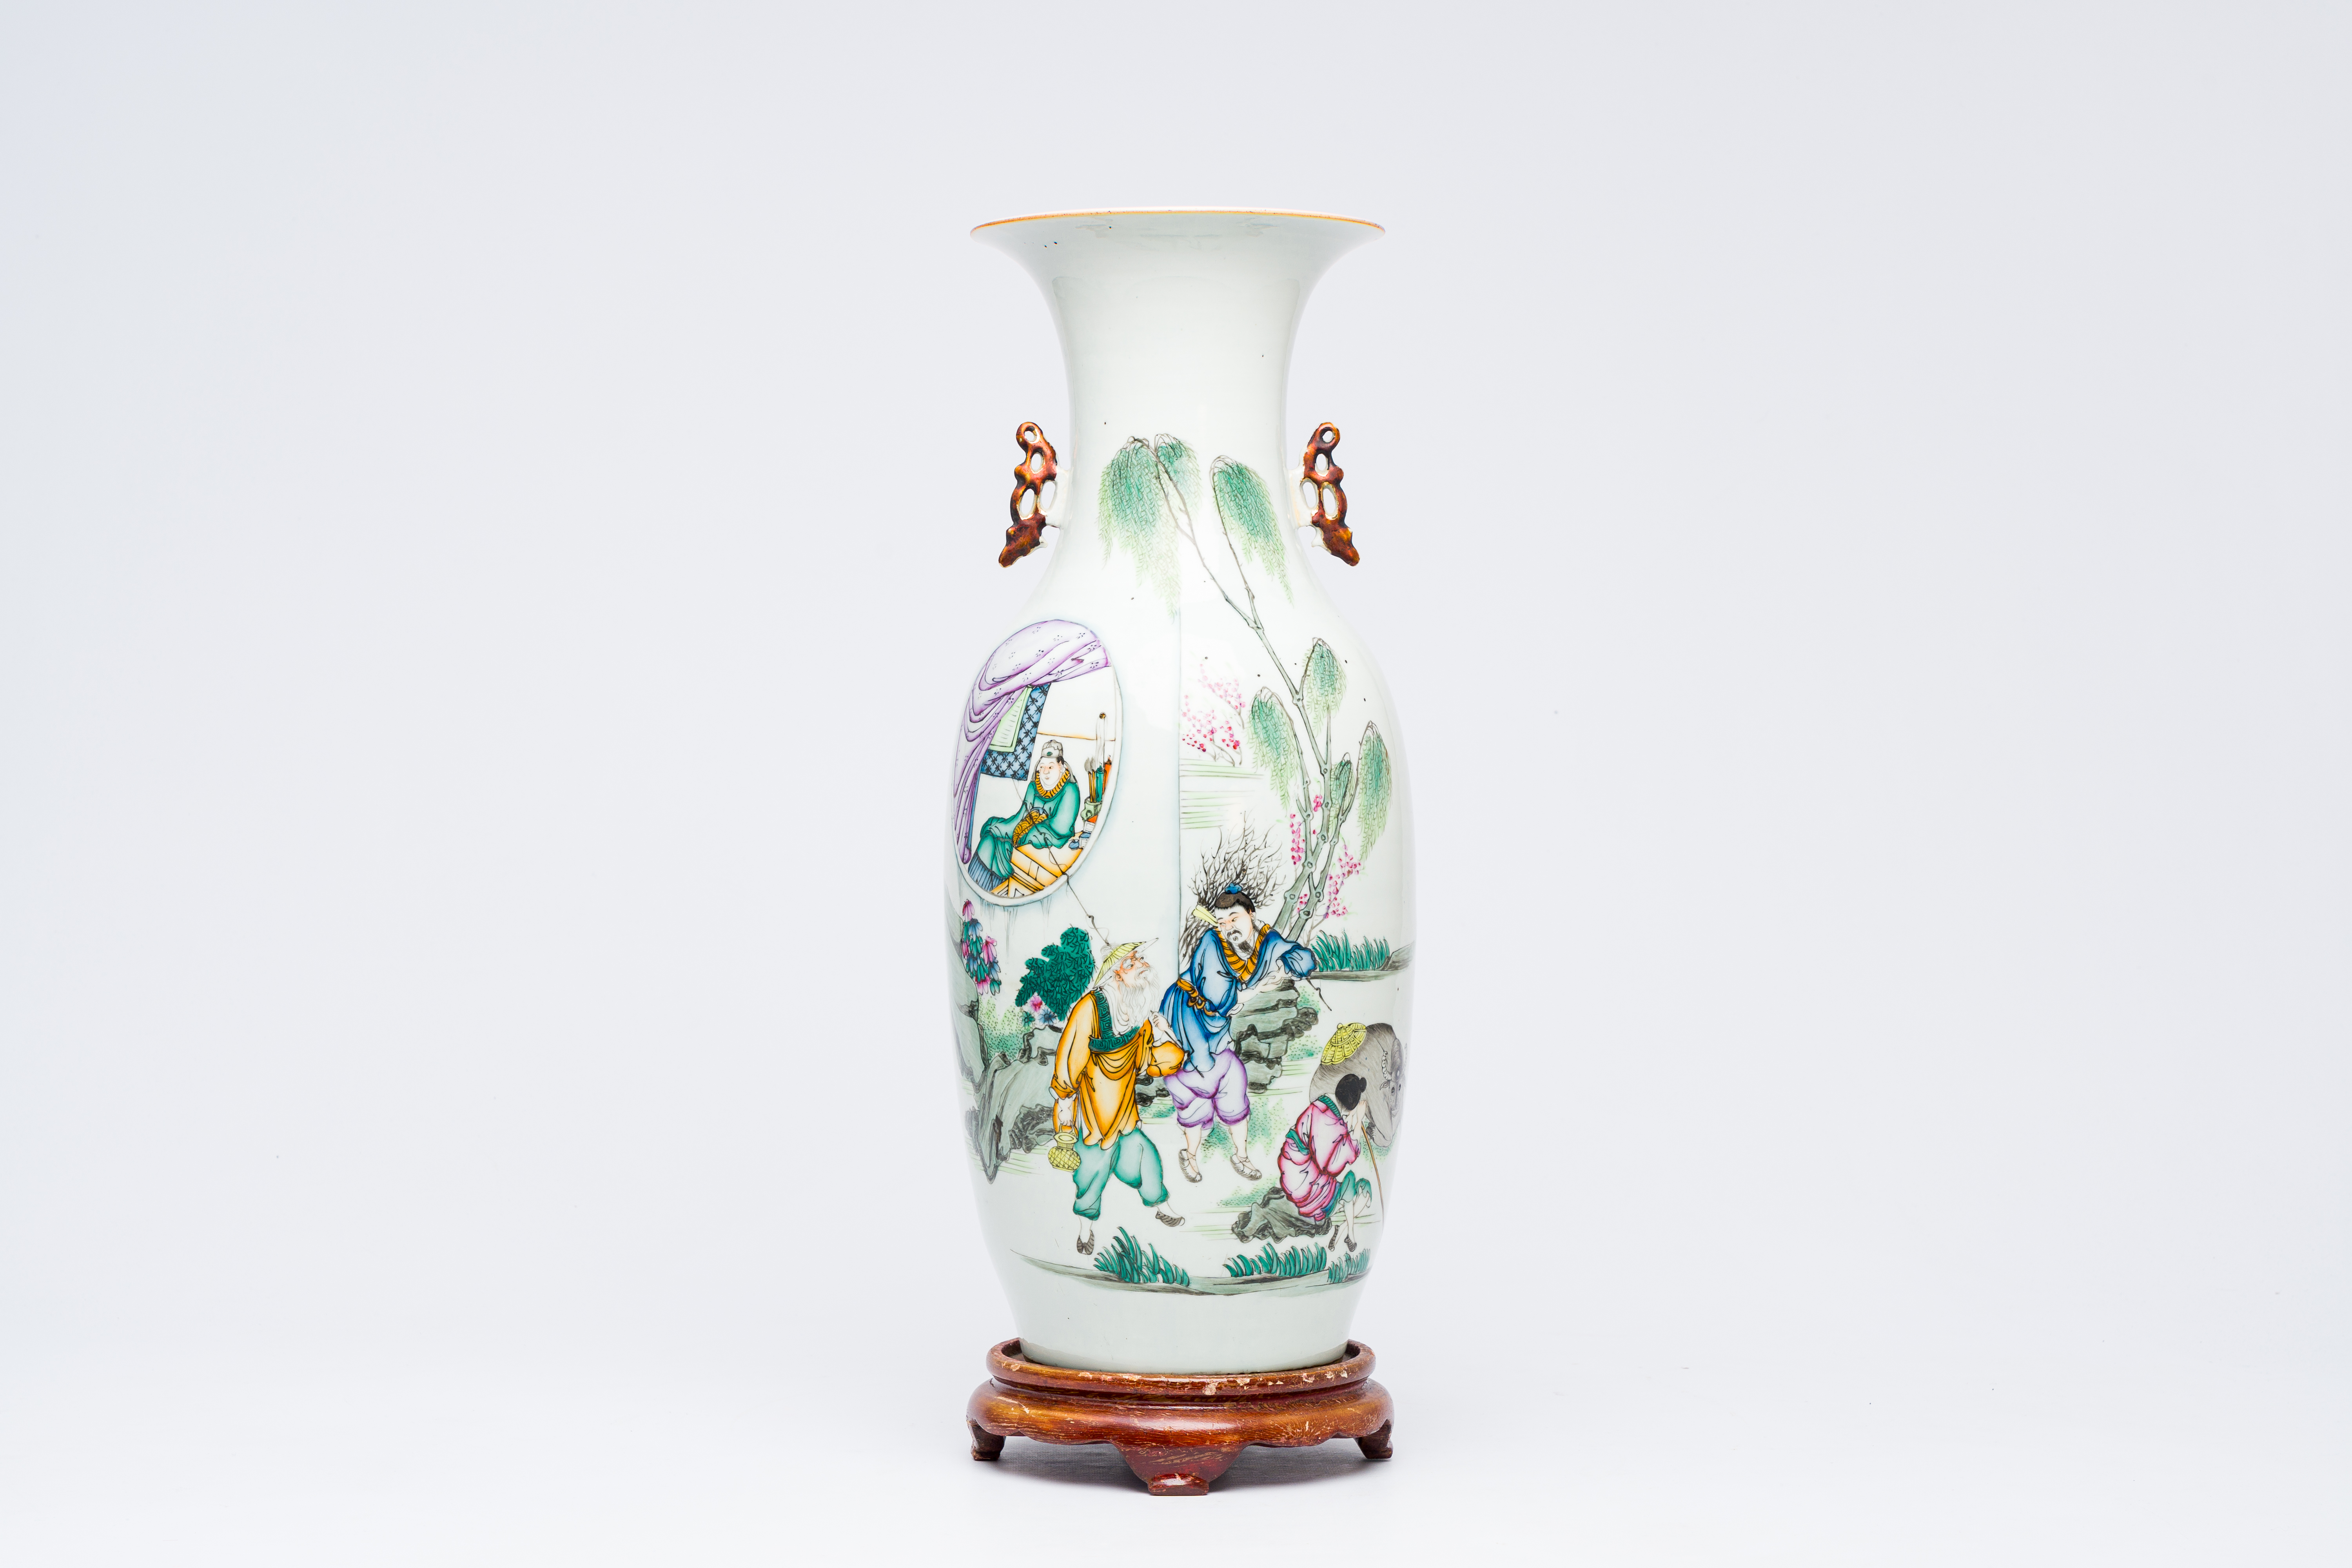 A Chinese famille rose vase with figures and a water buffalo in a landscape, 19th/20th C.